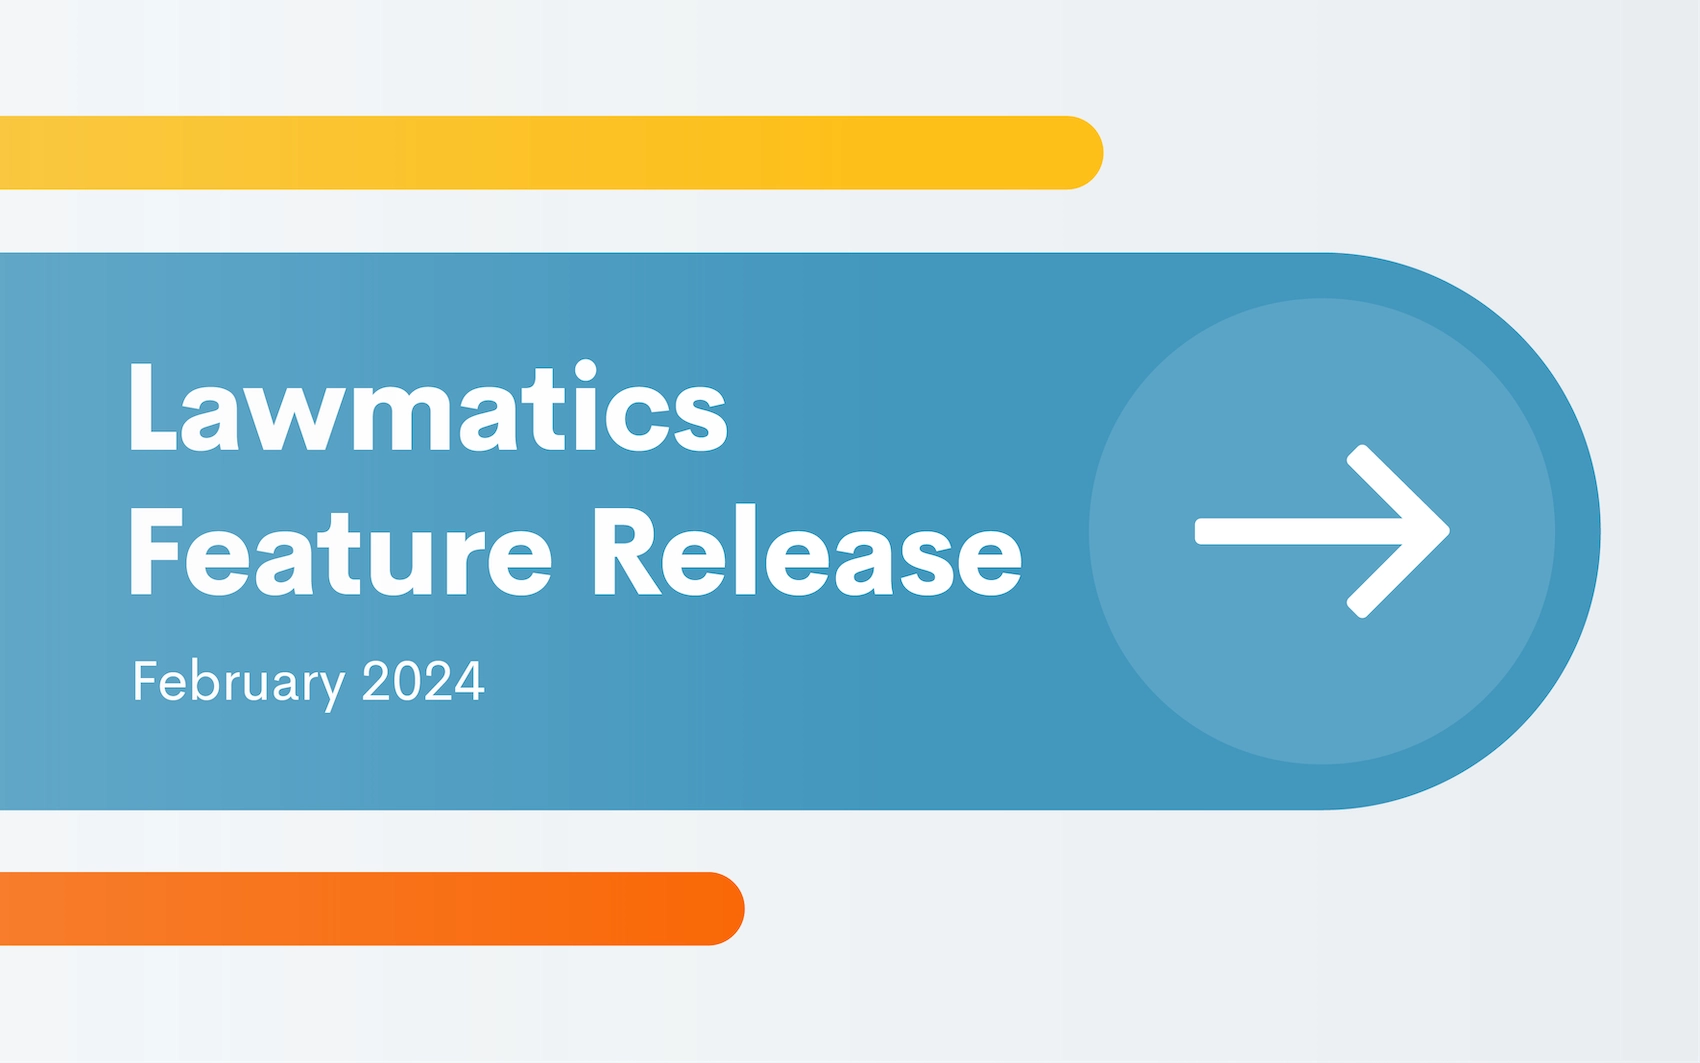 February 2024 Feature Release